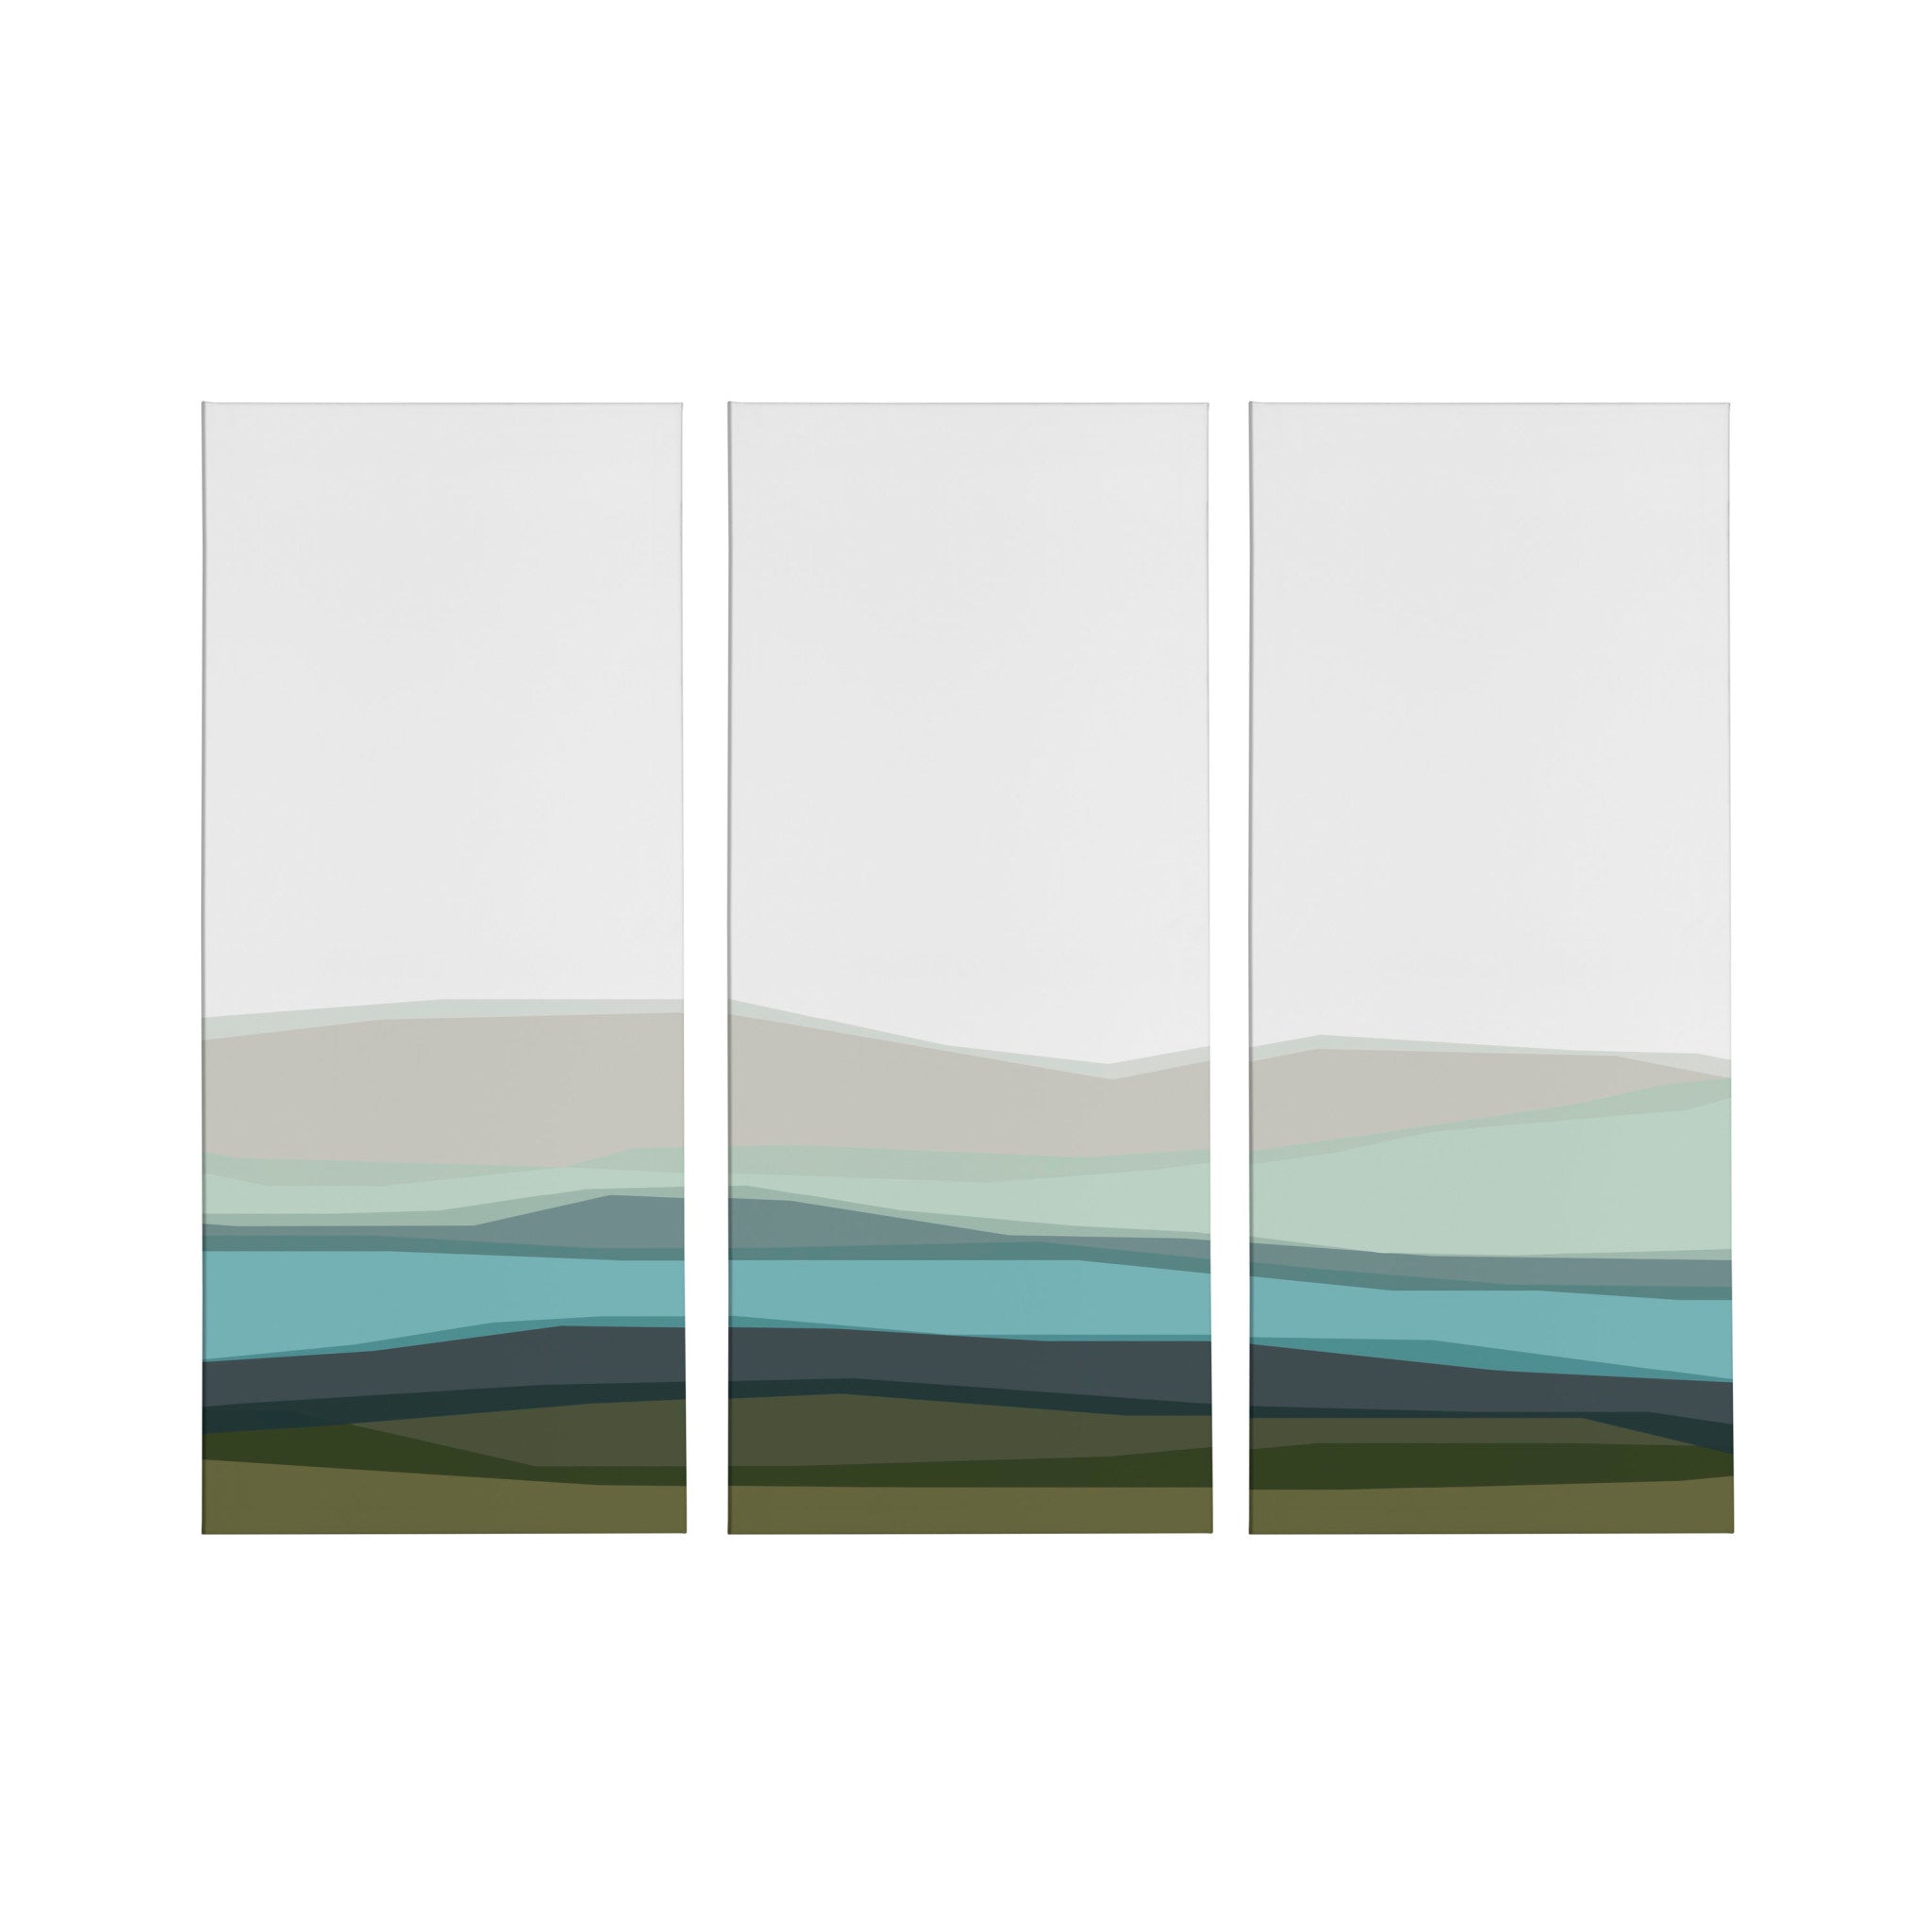 Abstract Blue Lake and Mountains Canvas Art Set by The Creative Bunch Studio